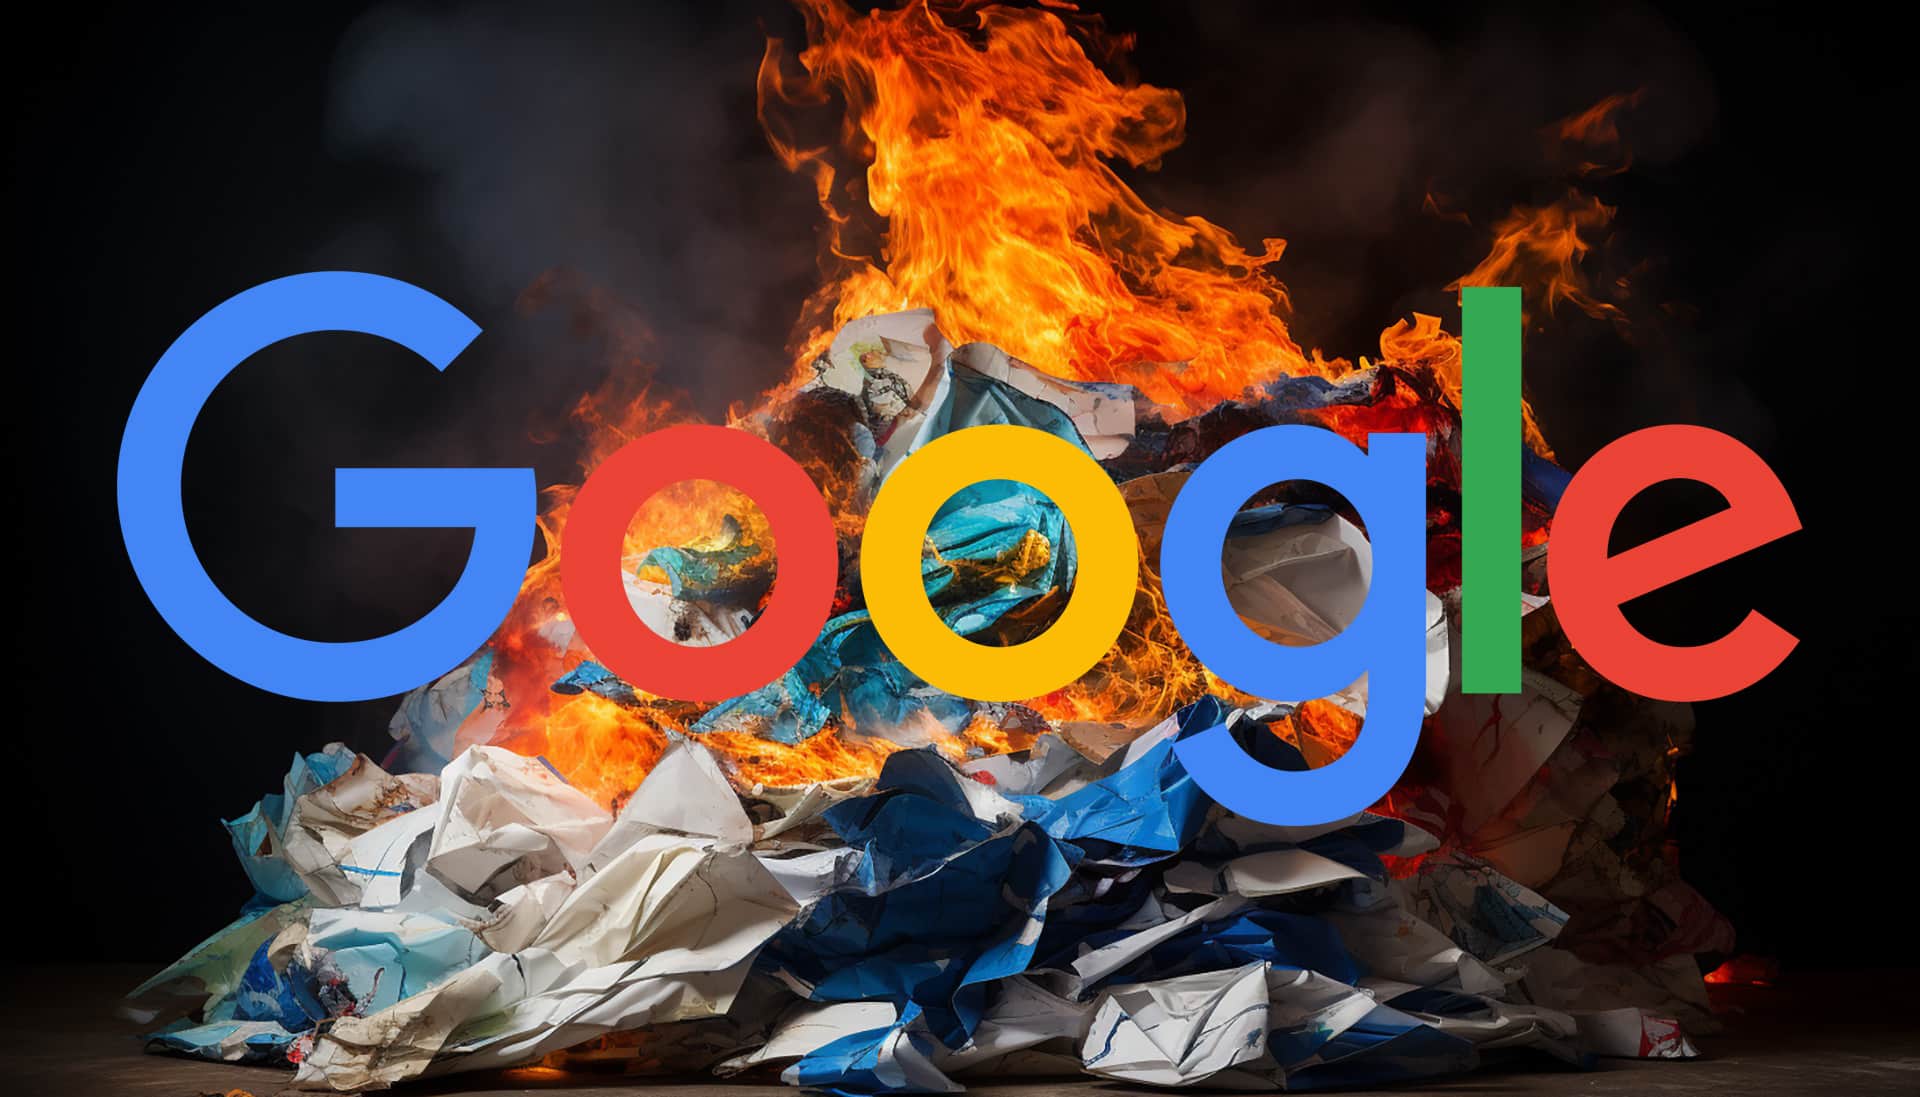 #Google Search is investigating reports of delayed indexing issues